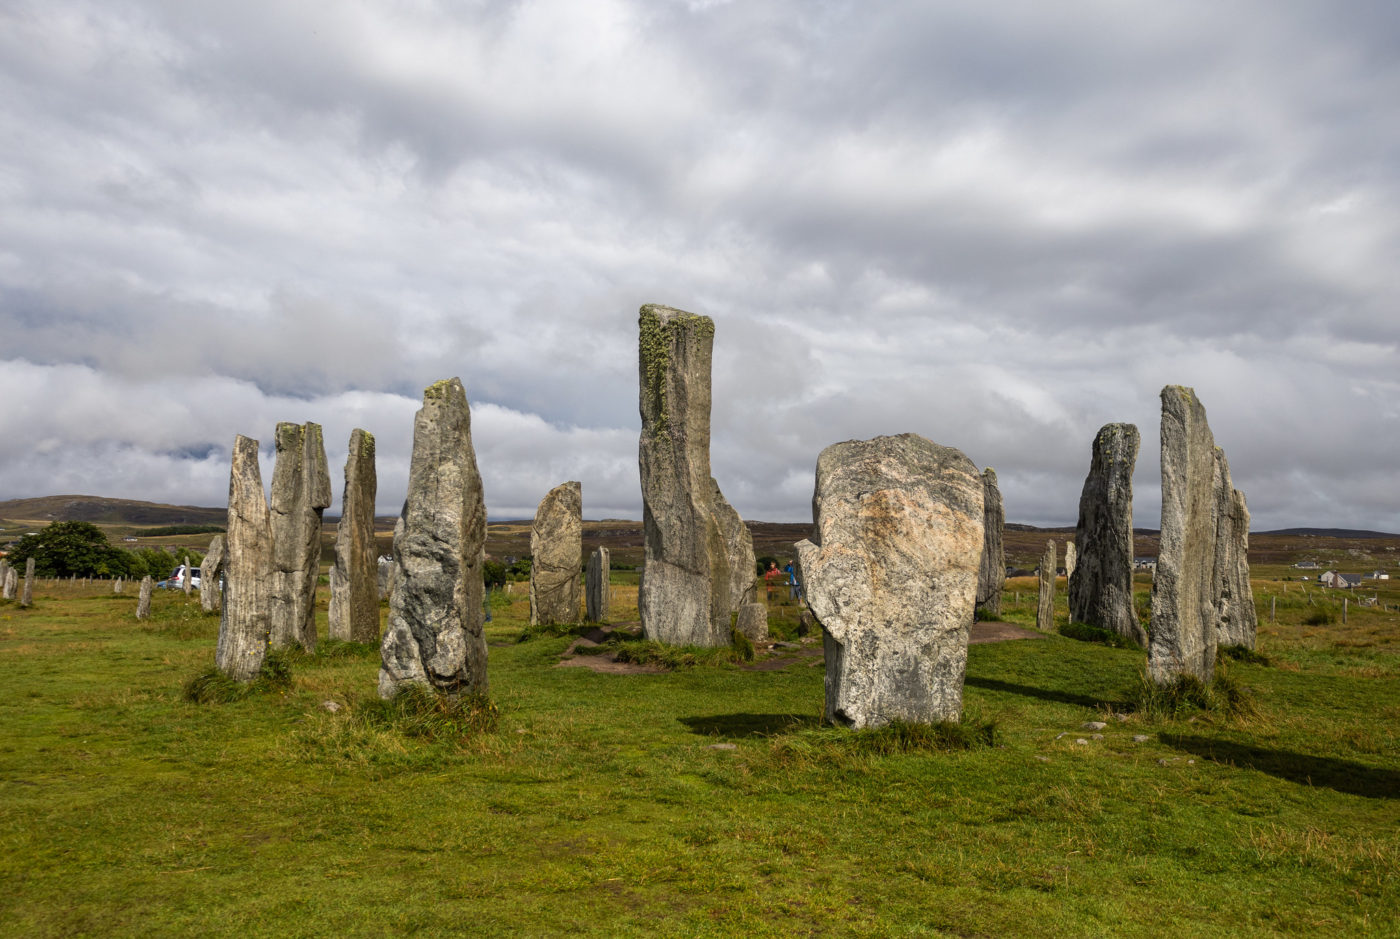 Scotland’s Magical Isle of Lewis Day Tour to Callanish Stones, Dun Carloway Broch and Stornoway